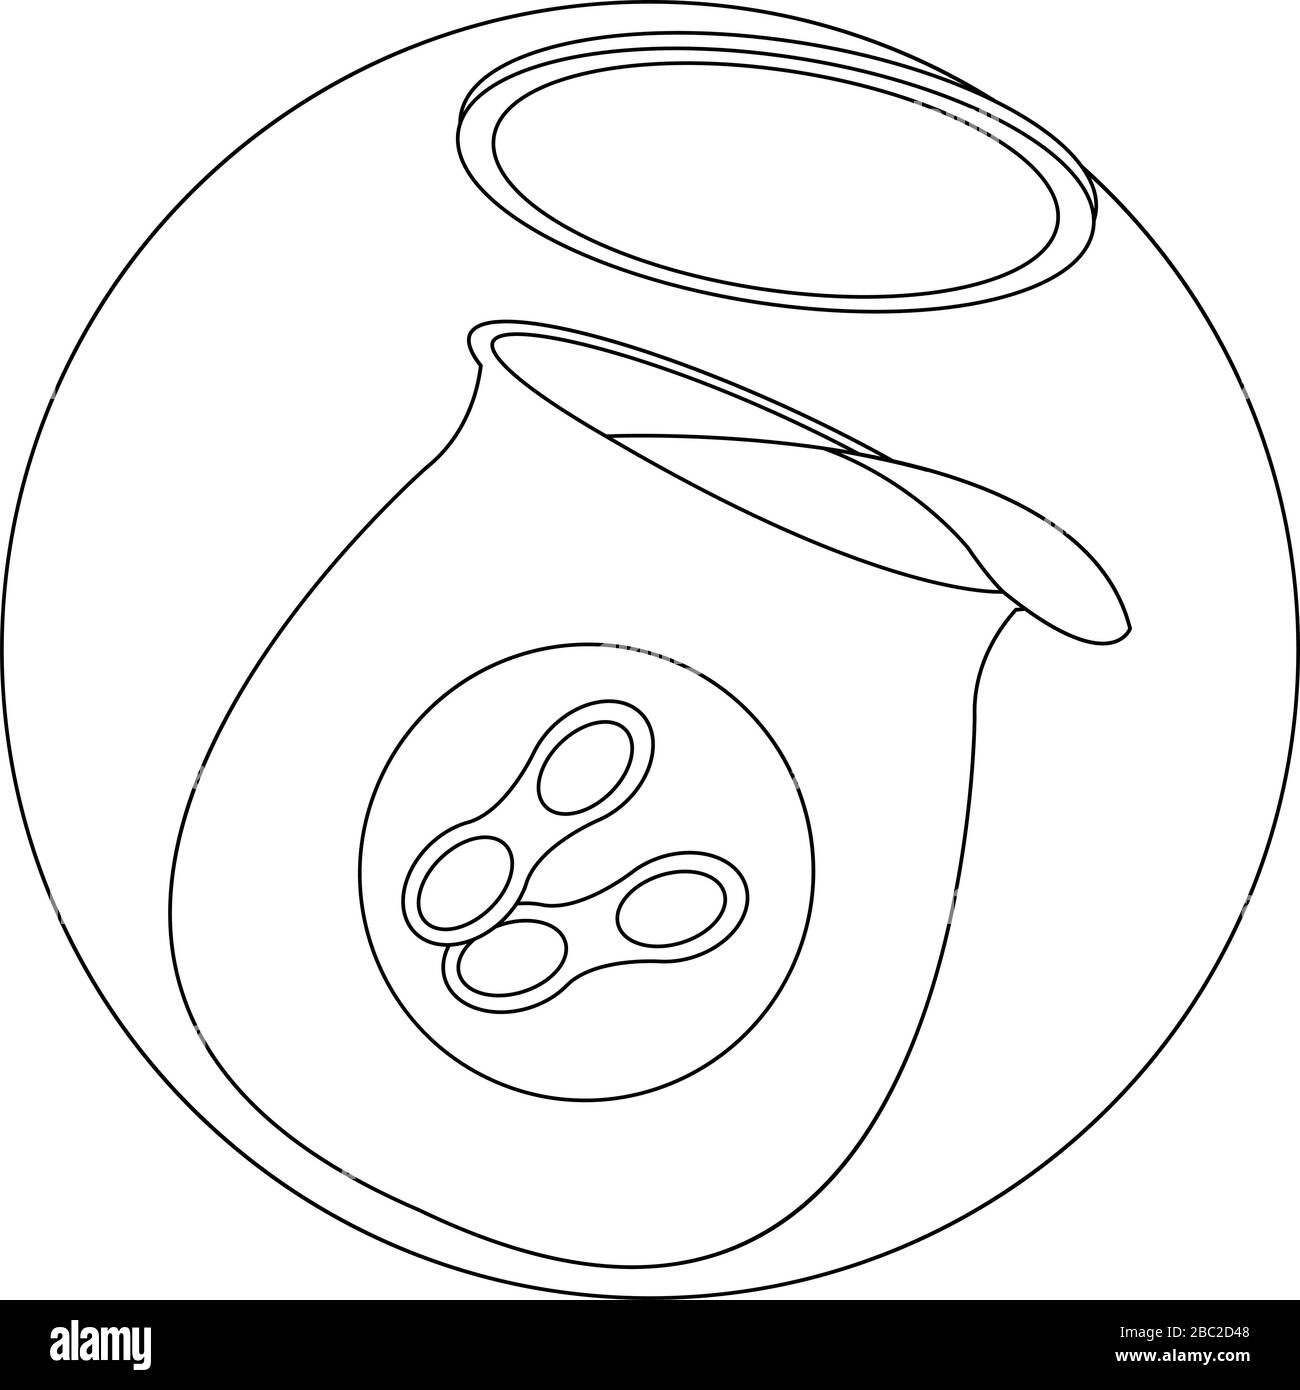 Peanut Butter Simple Line Art Illustration suitable for Coloring Book Stock Vector